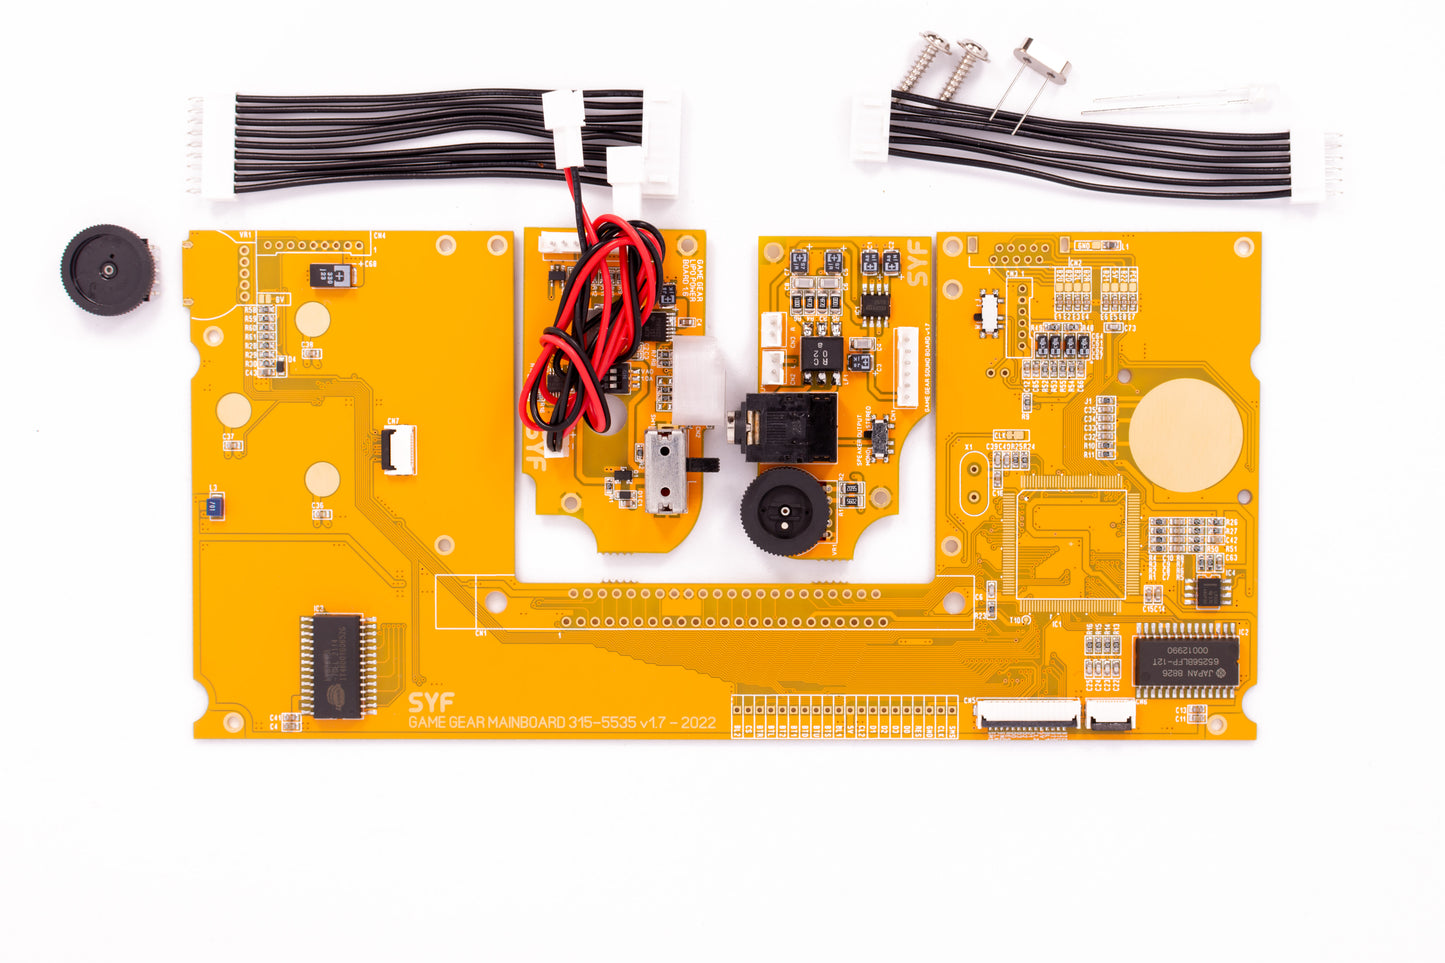 Game Gear Mainboard 315-5535 v1.7 - 3-in-1 kit